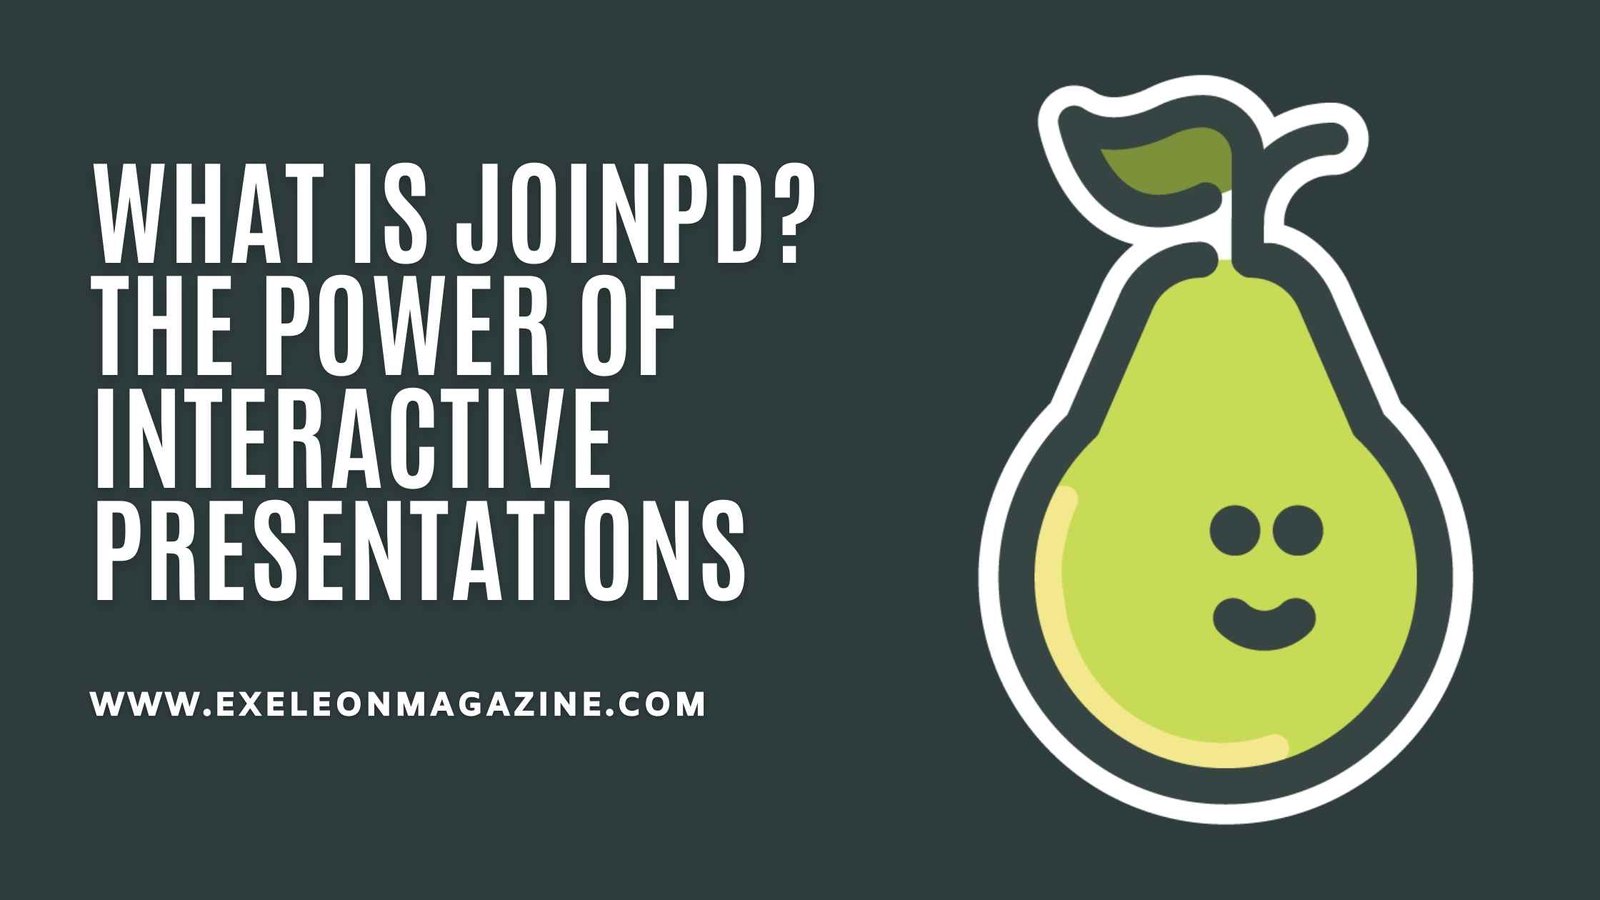 What Is JoinPD?